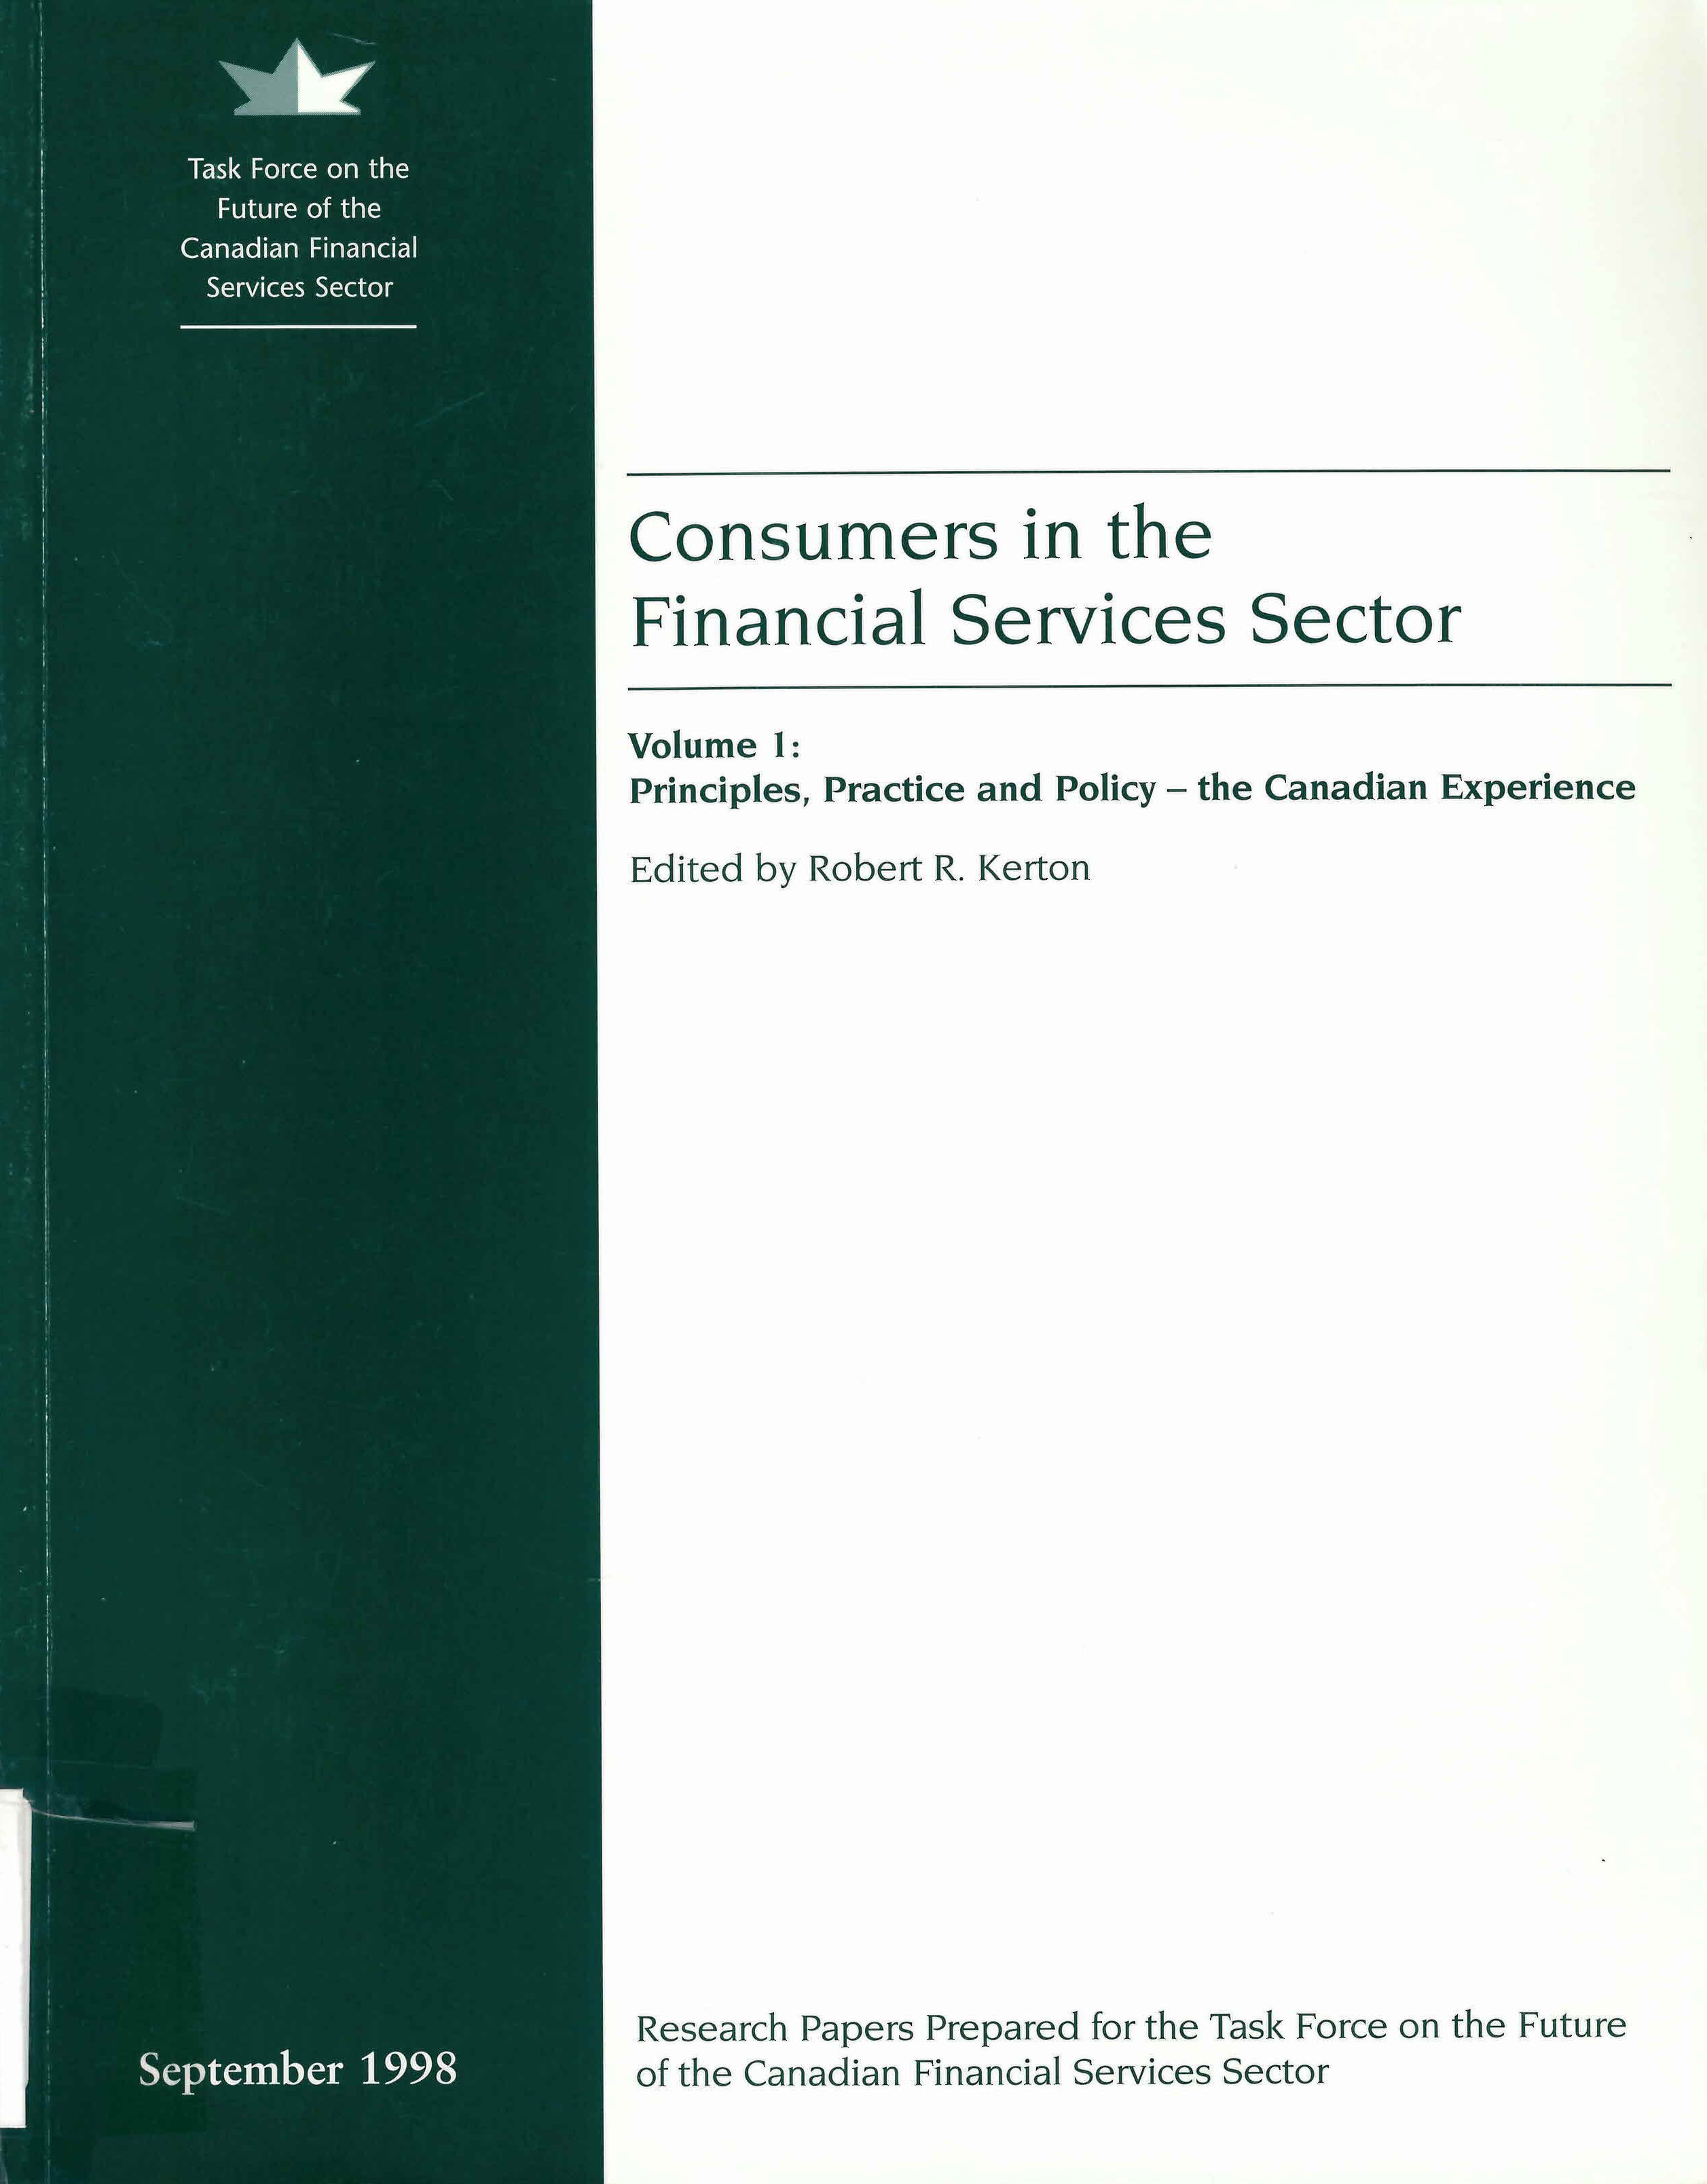 Consumers in the financial services sector